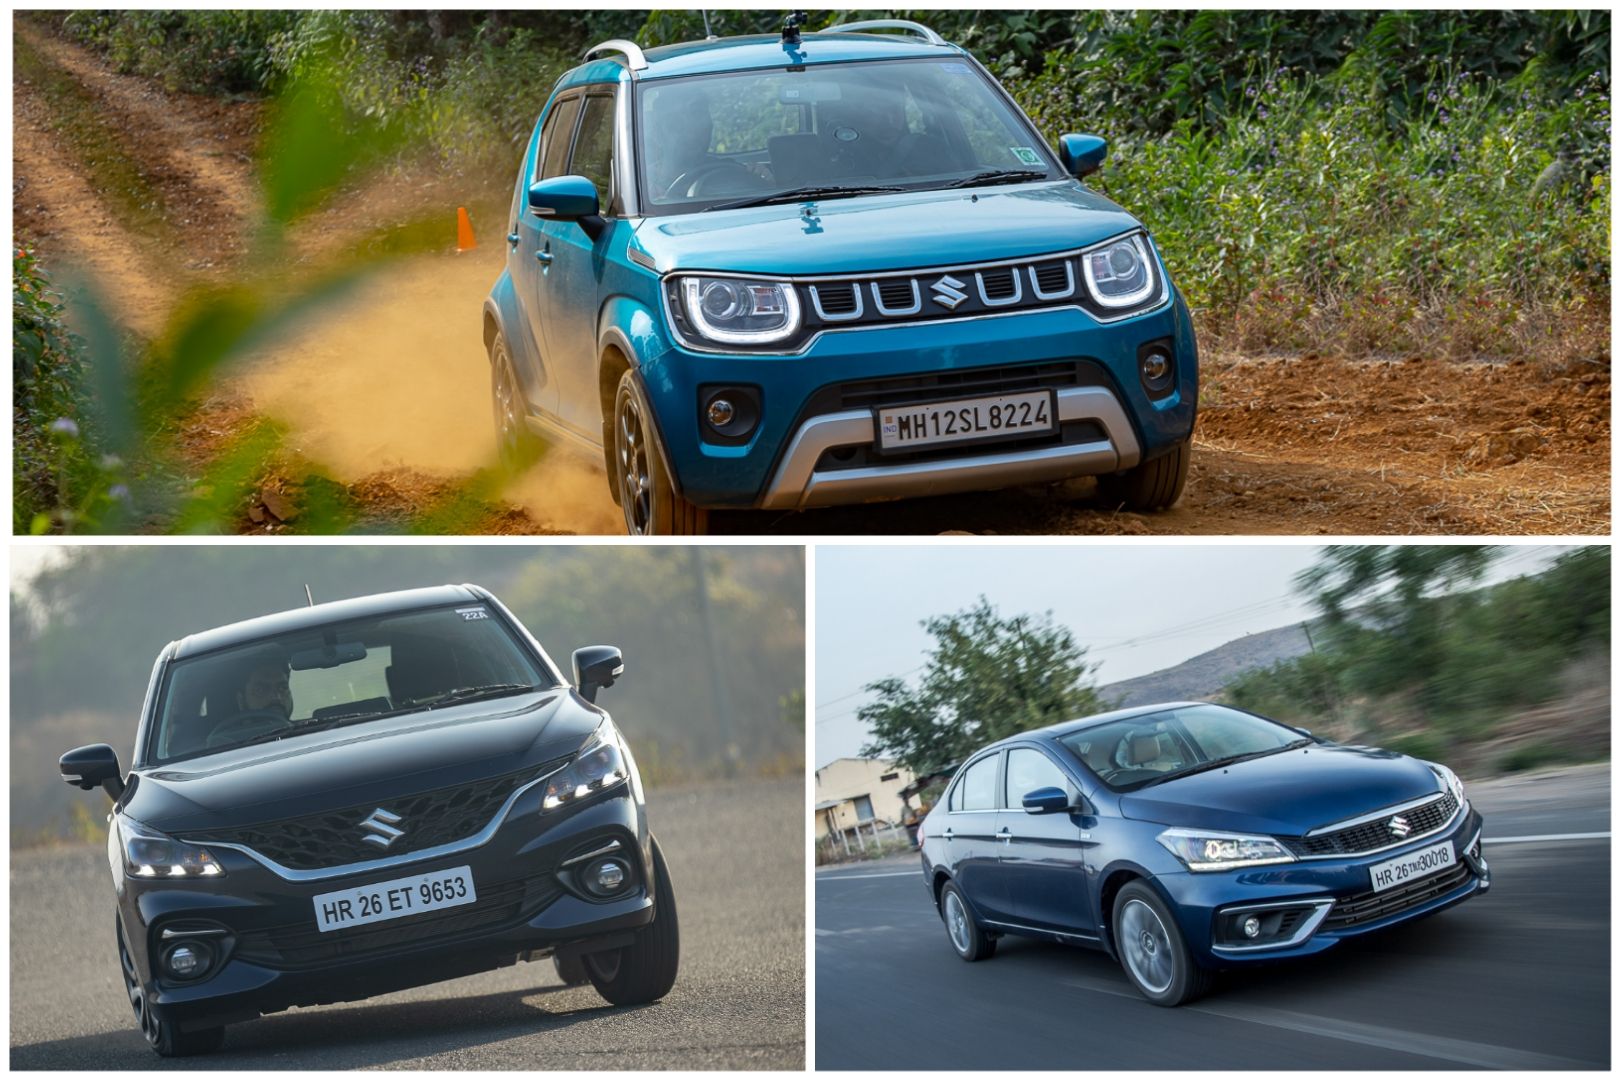 You Can Save Up To Rs 69,000 On Maruti Nexa Cars This September